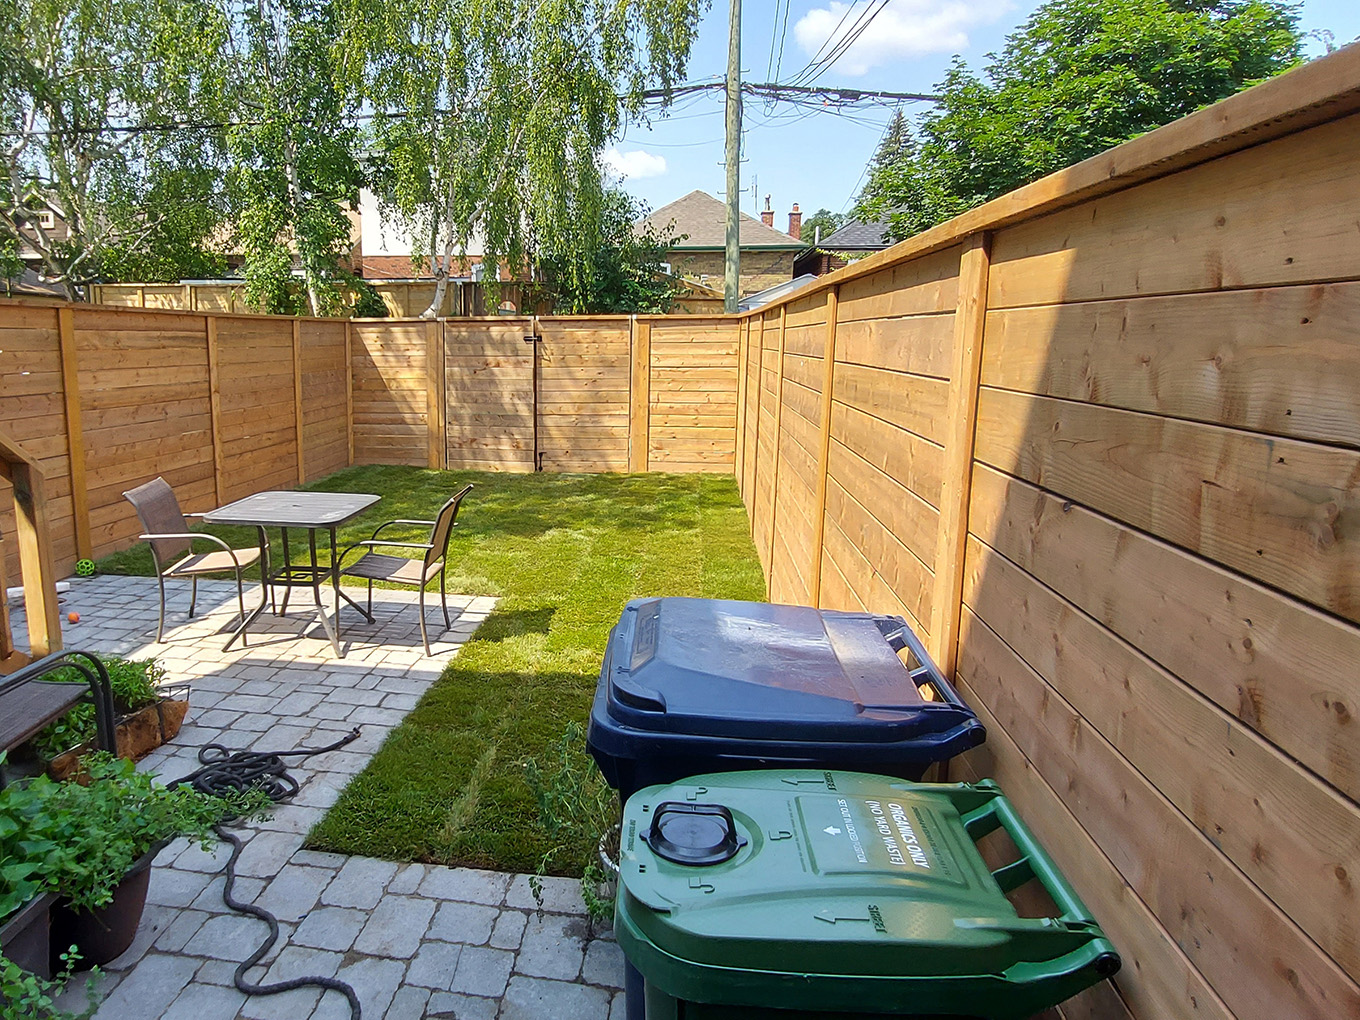 Maple Vaughan Ontario Fence Project Photo